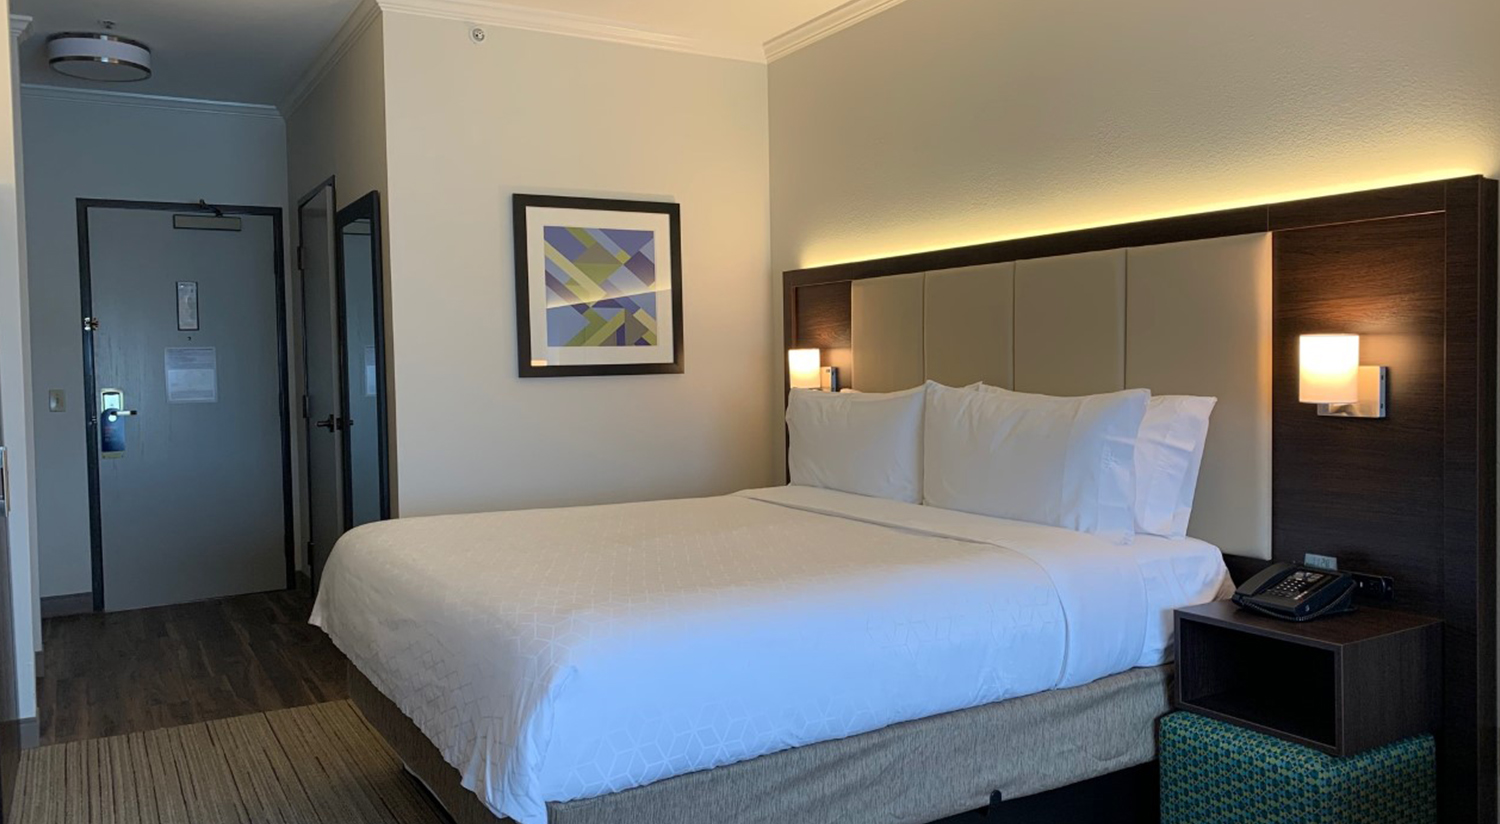 FAMILY-FRIENDLY ROOMS IN SANTA CLARA NEARBY LEVI’S STADIUM AND GREAT AMERICA